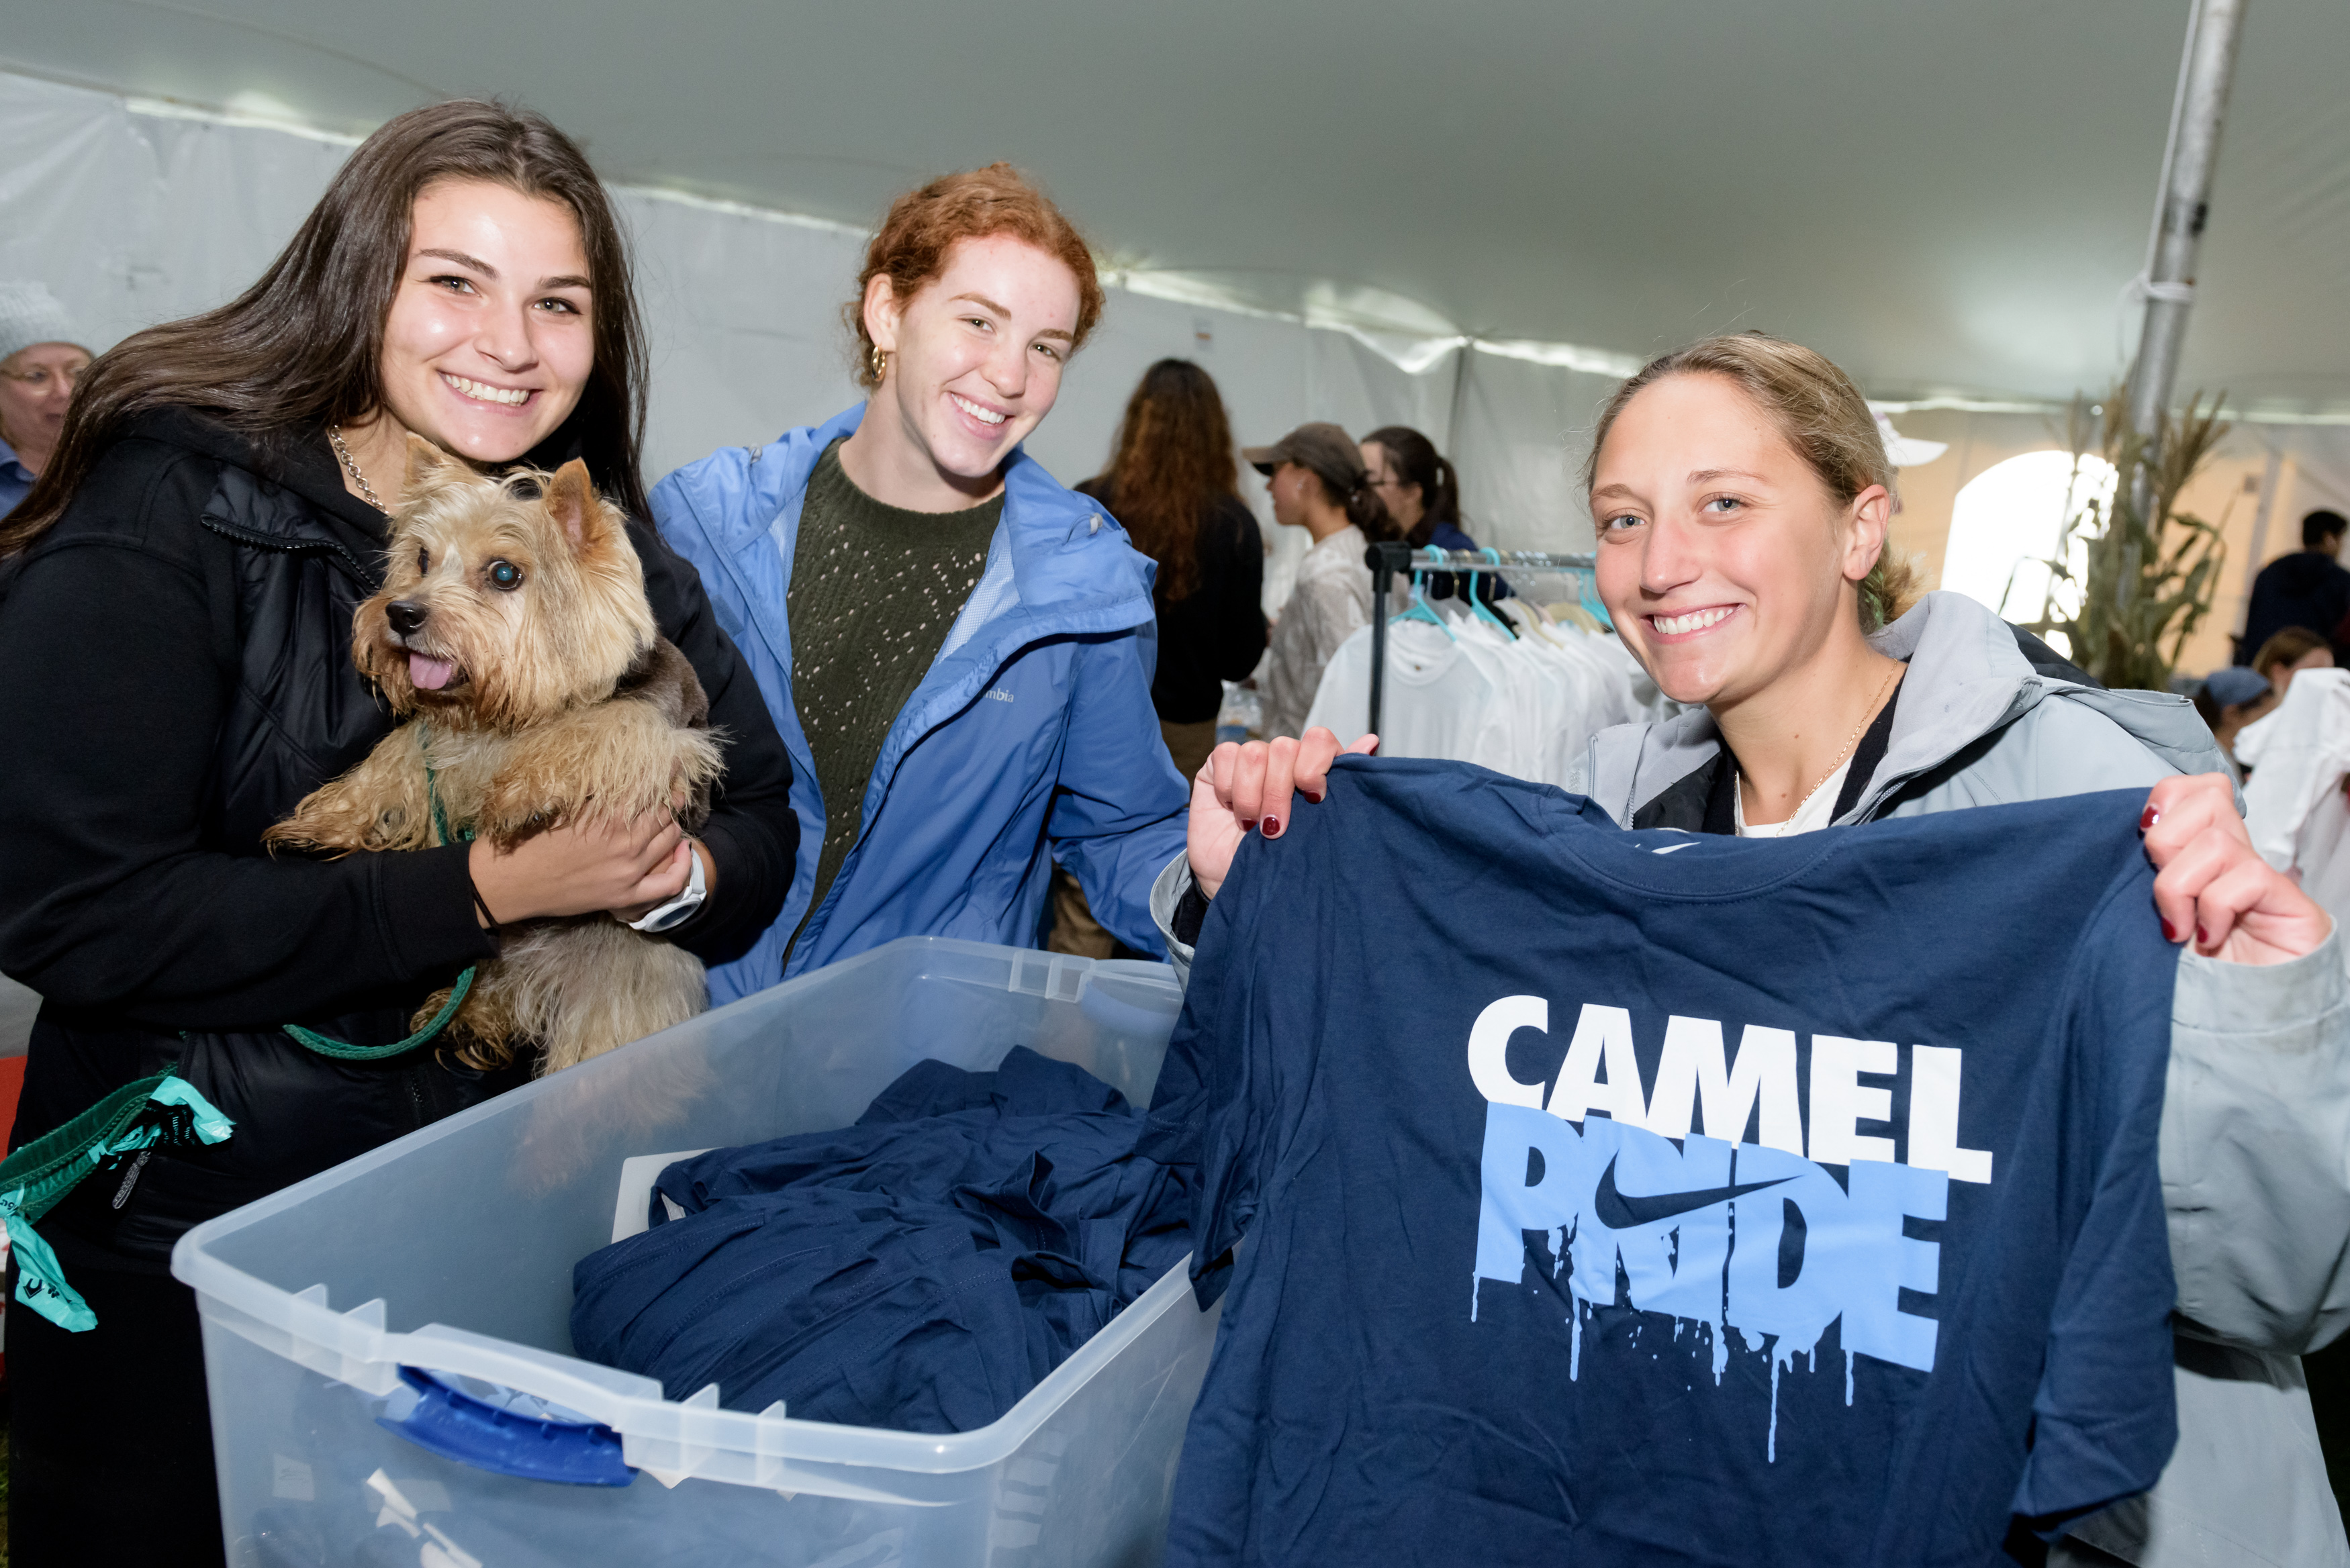 Students posing with camel merch